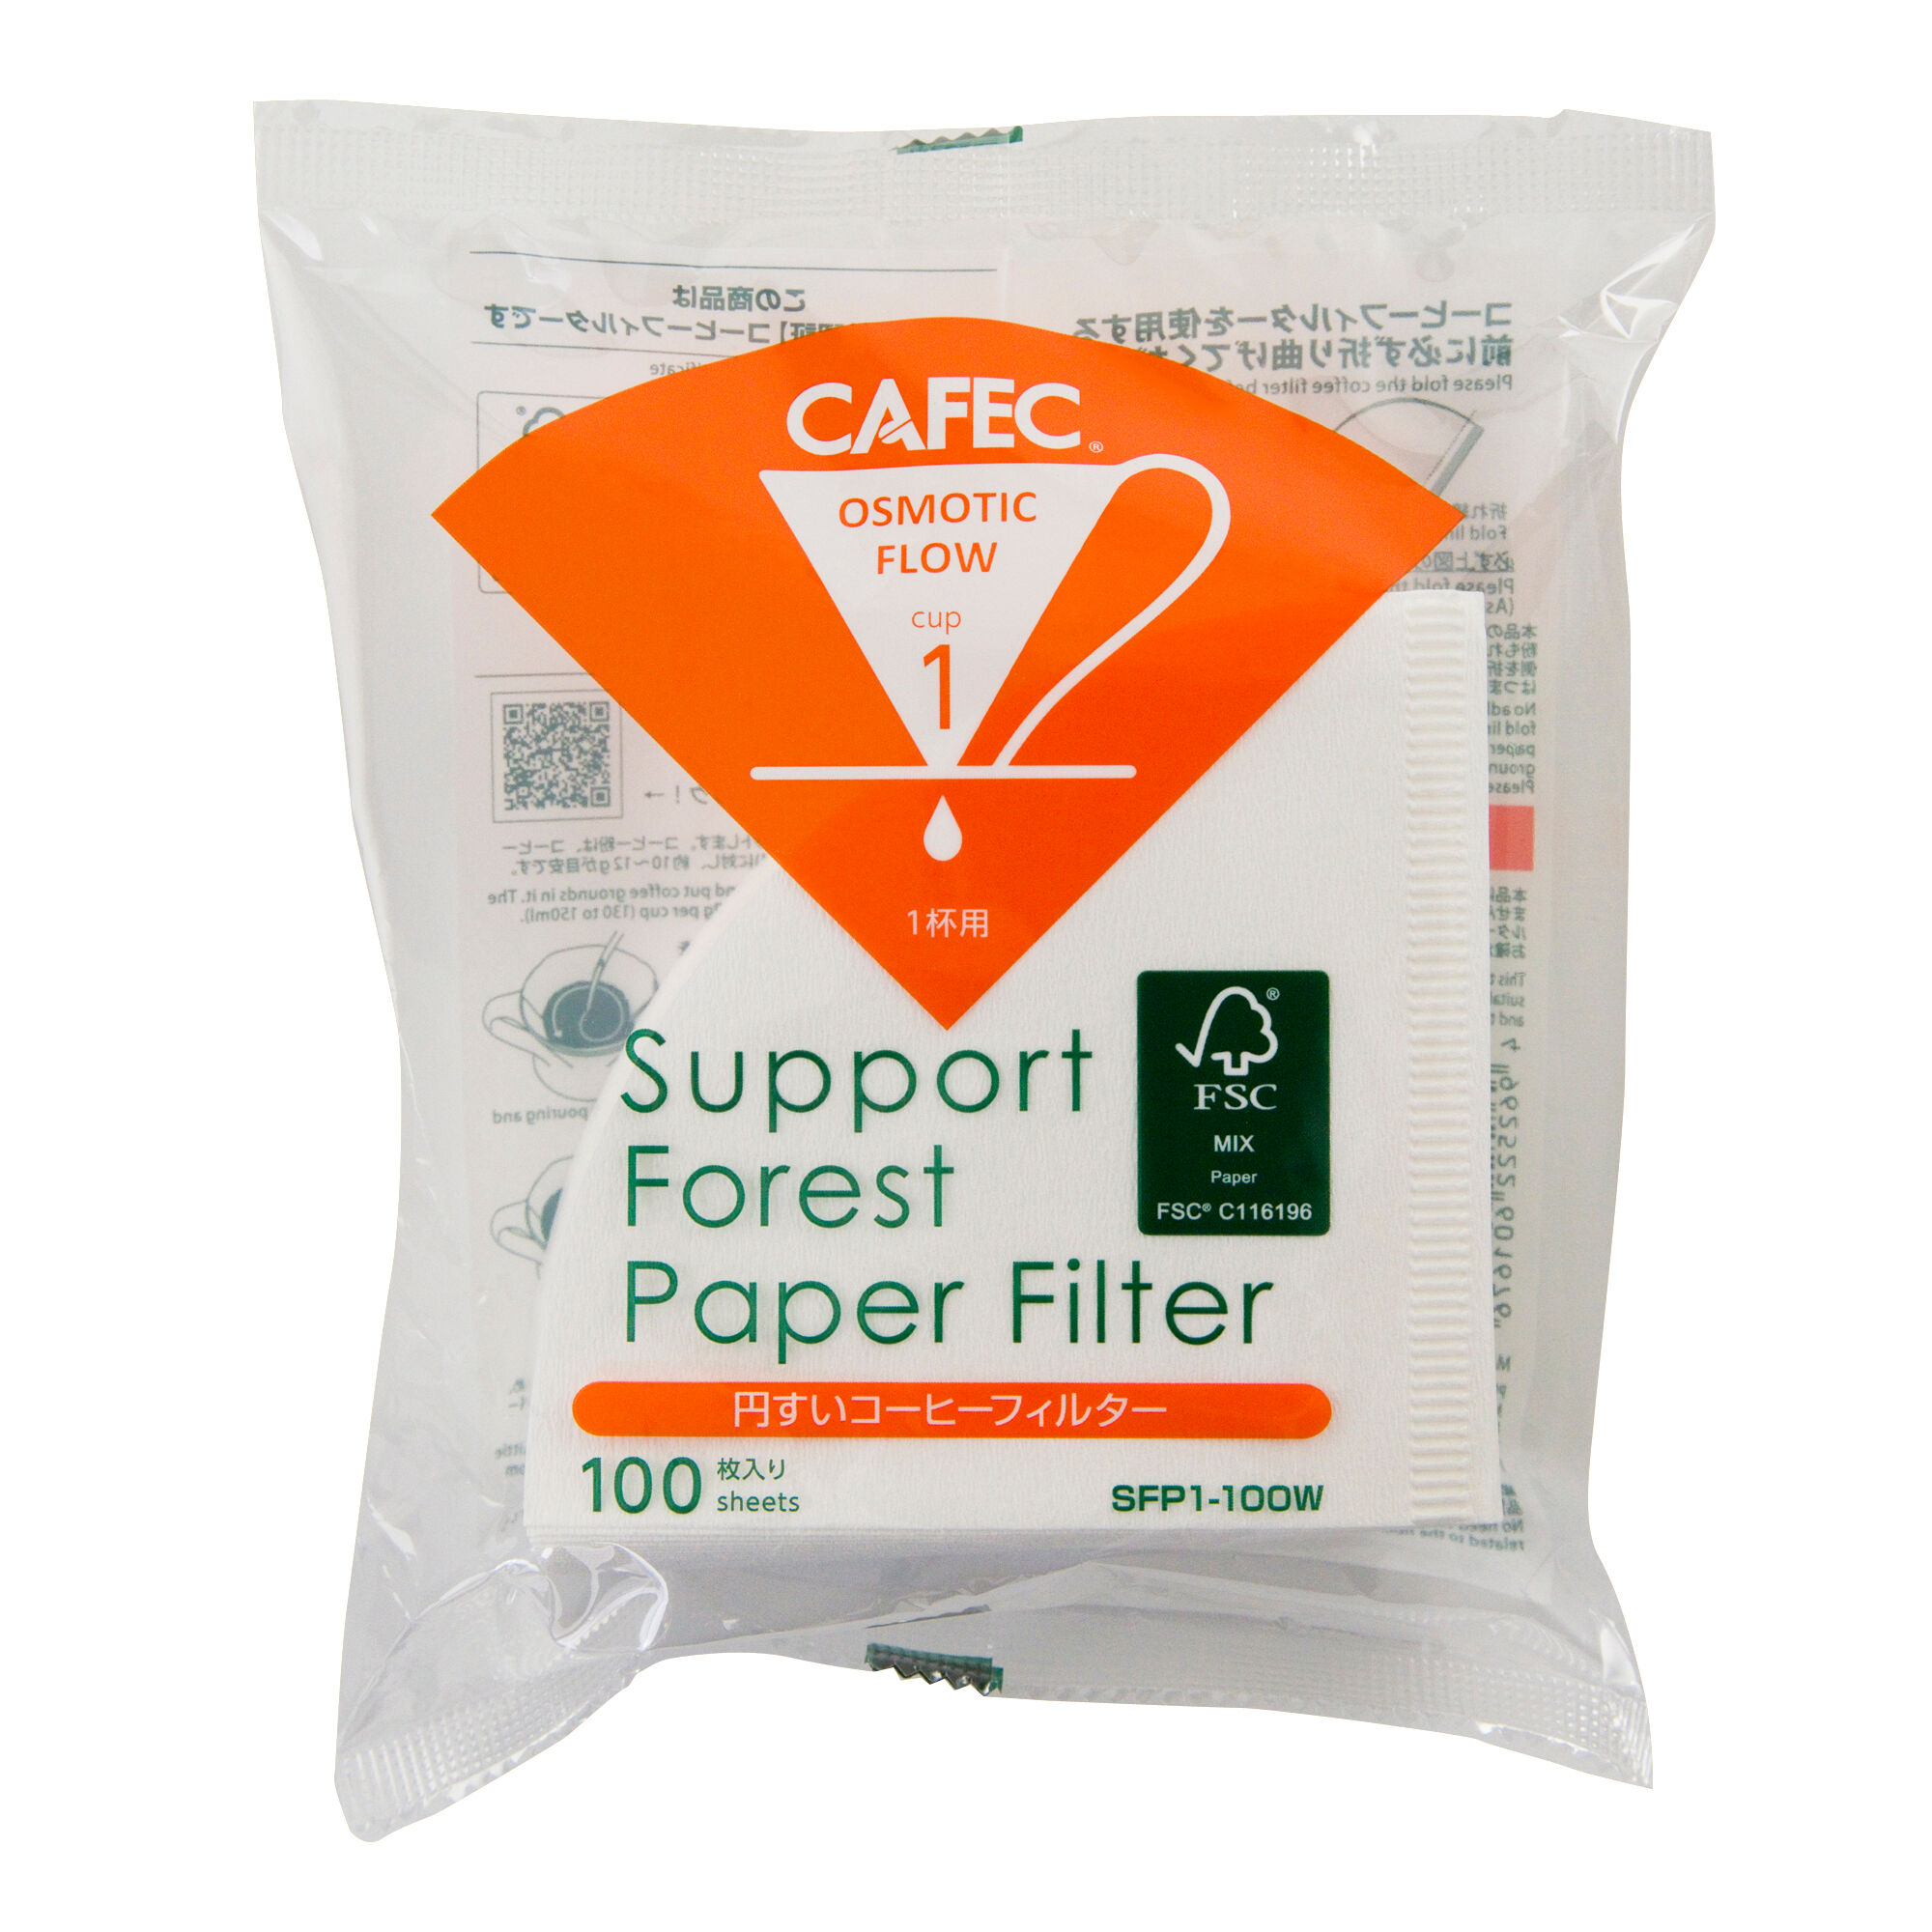 Kaffebox Cafec SFP Filter Paper - Cup 1 (1-2 cups)